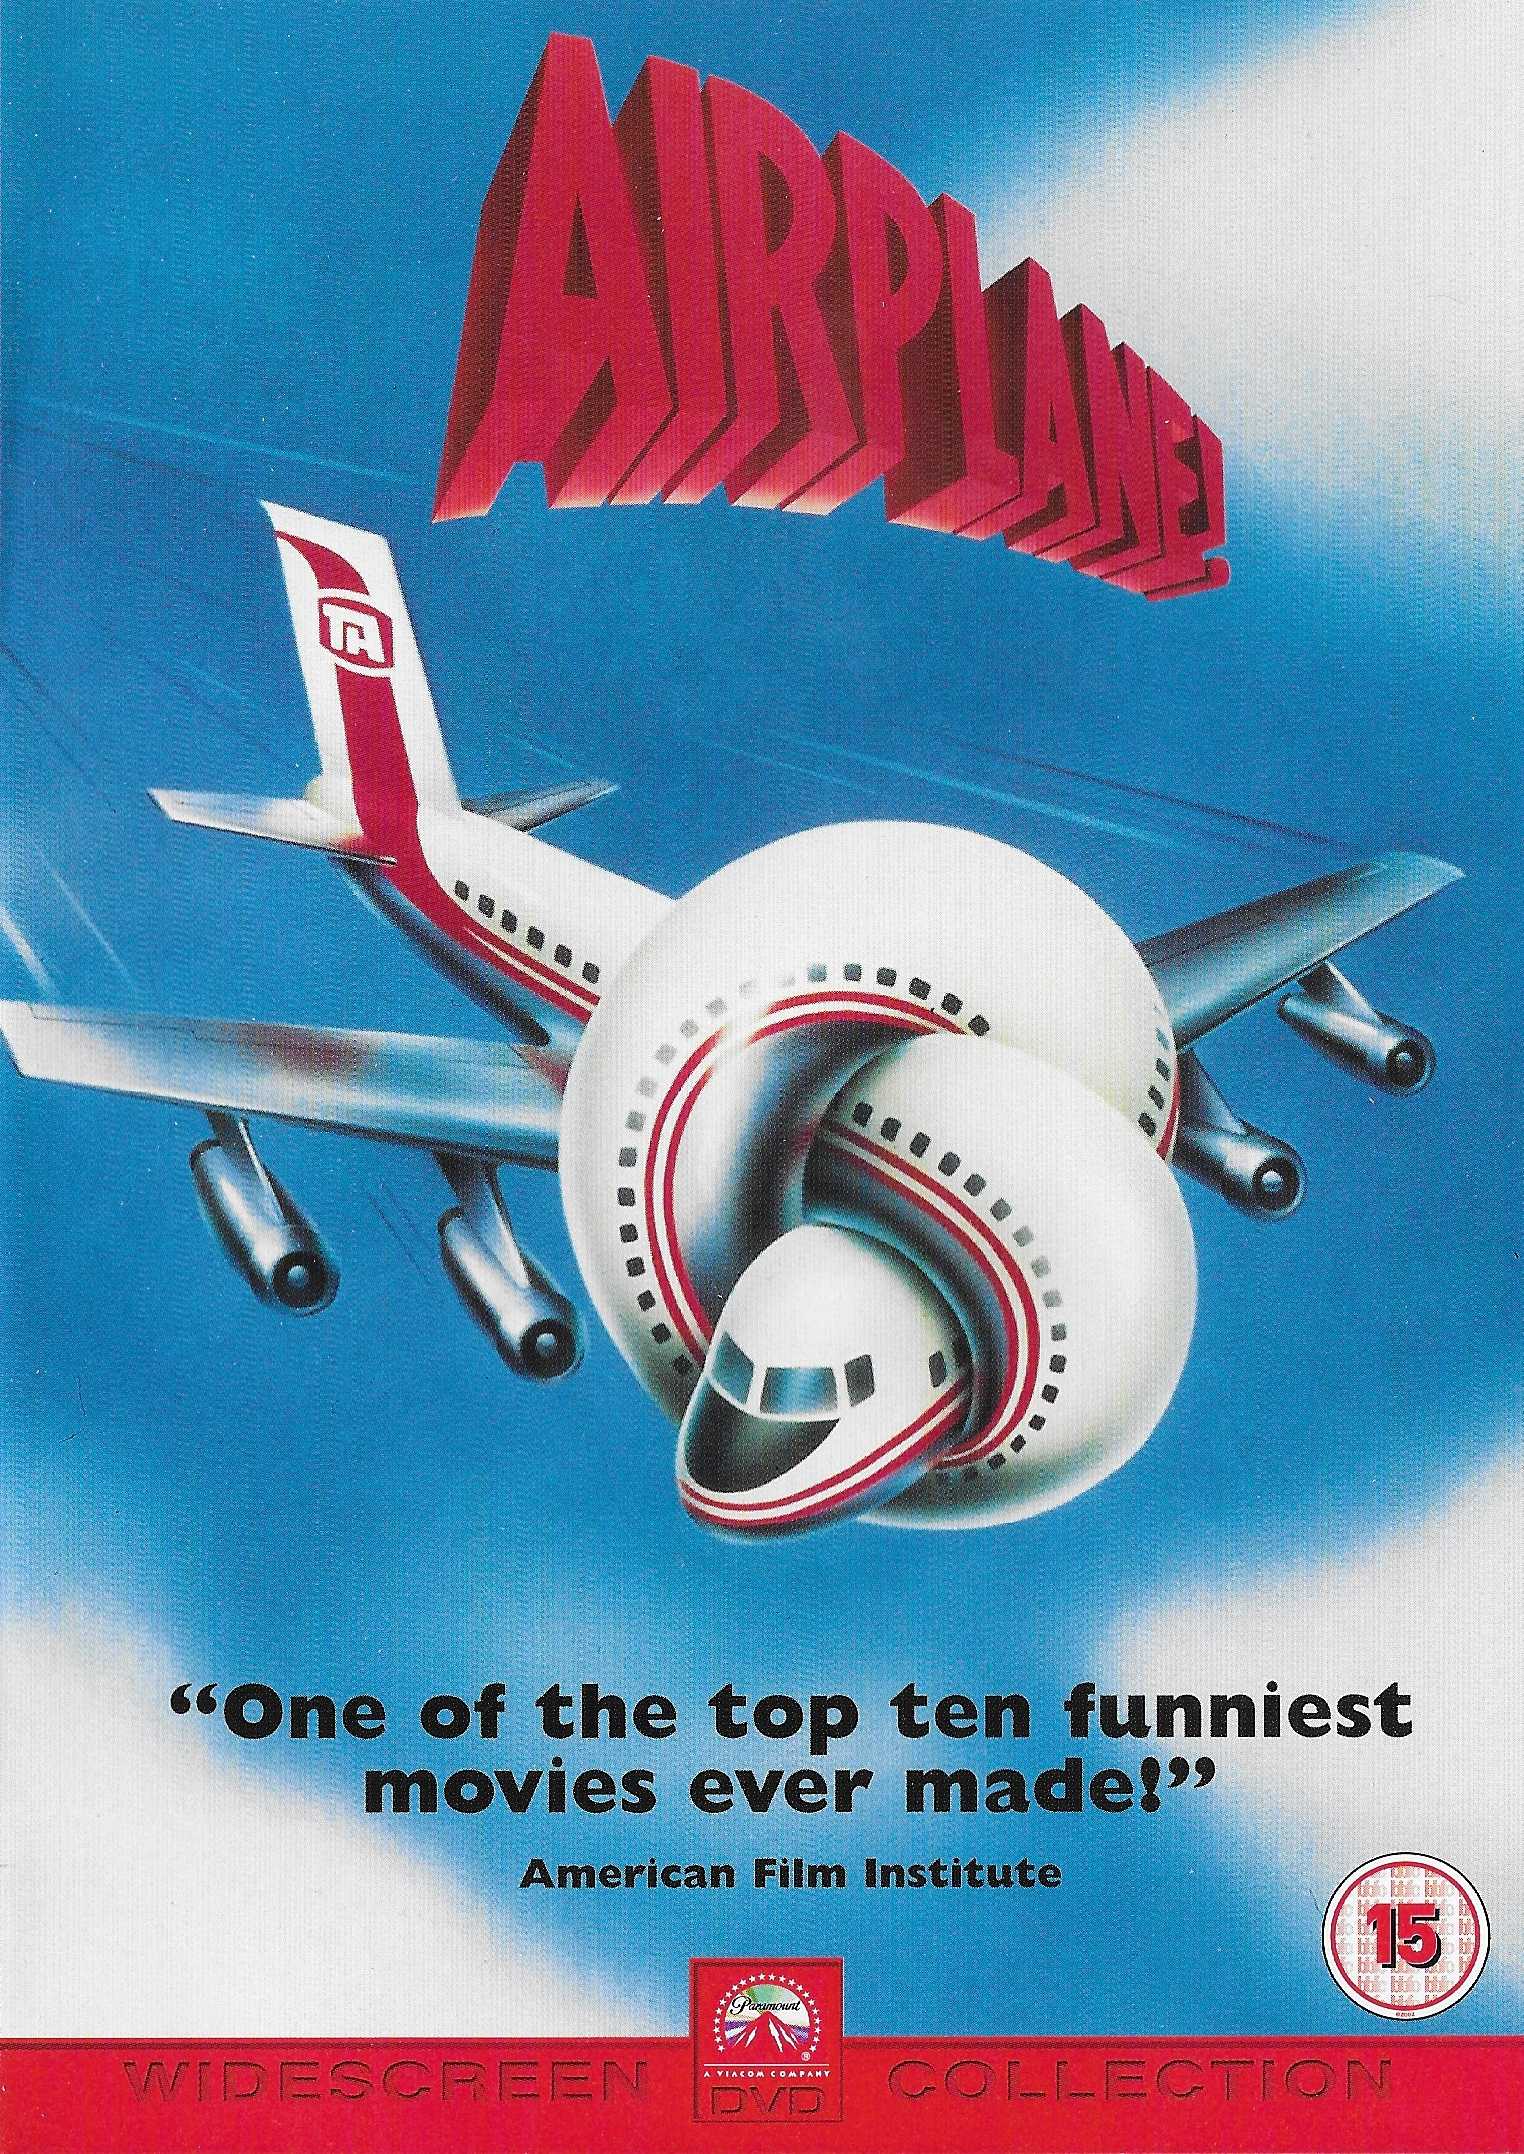 Picture of Airplane! by artist Jim Abrahams / David Zucker / Jerry Zucker from ITV, Channel 4 and Channel 5 dvds library